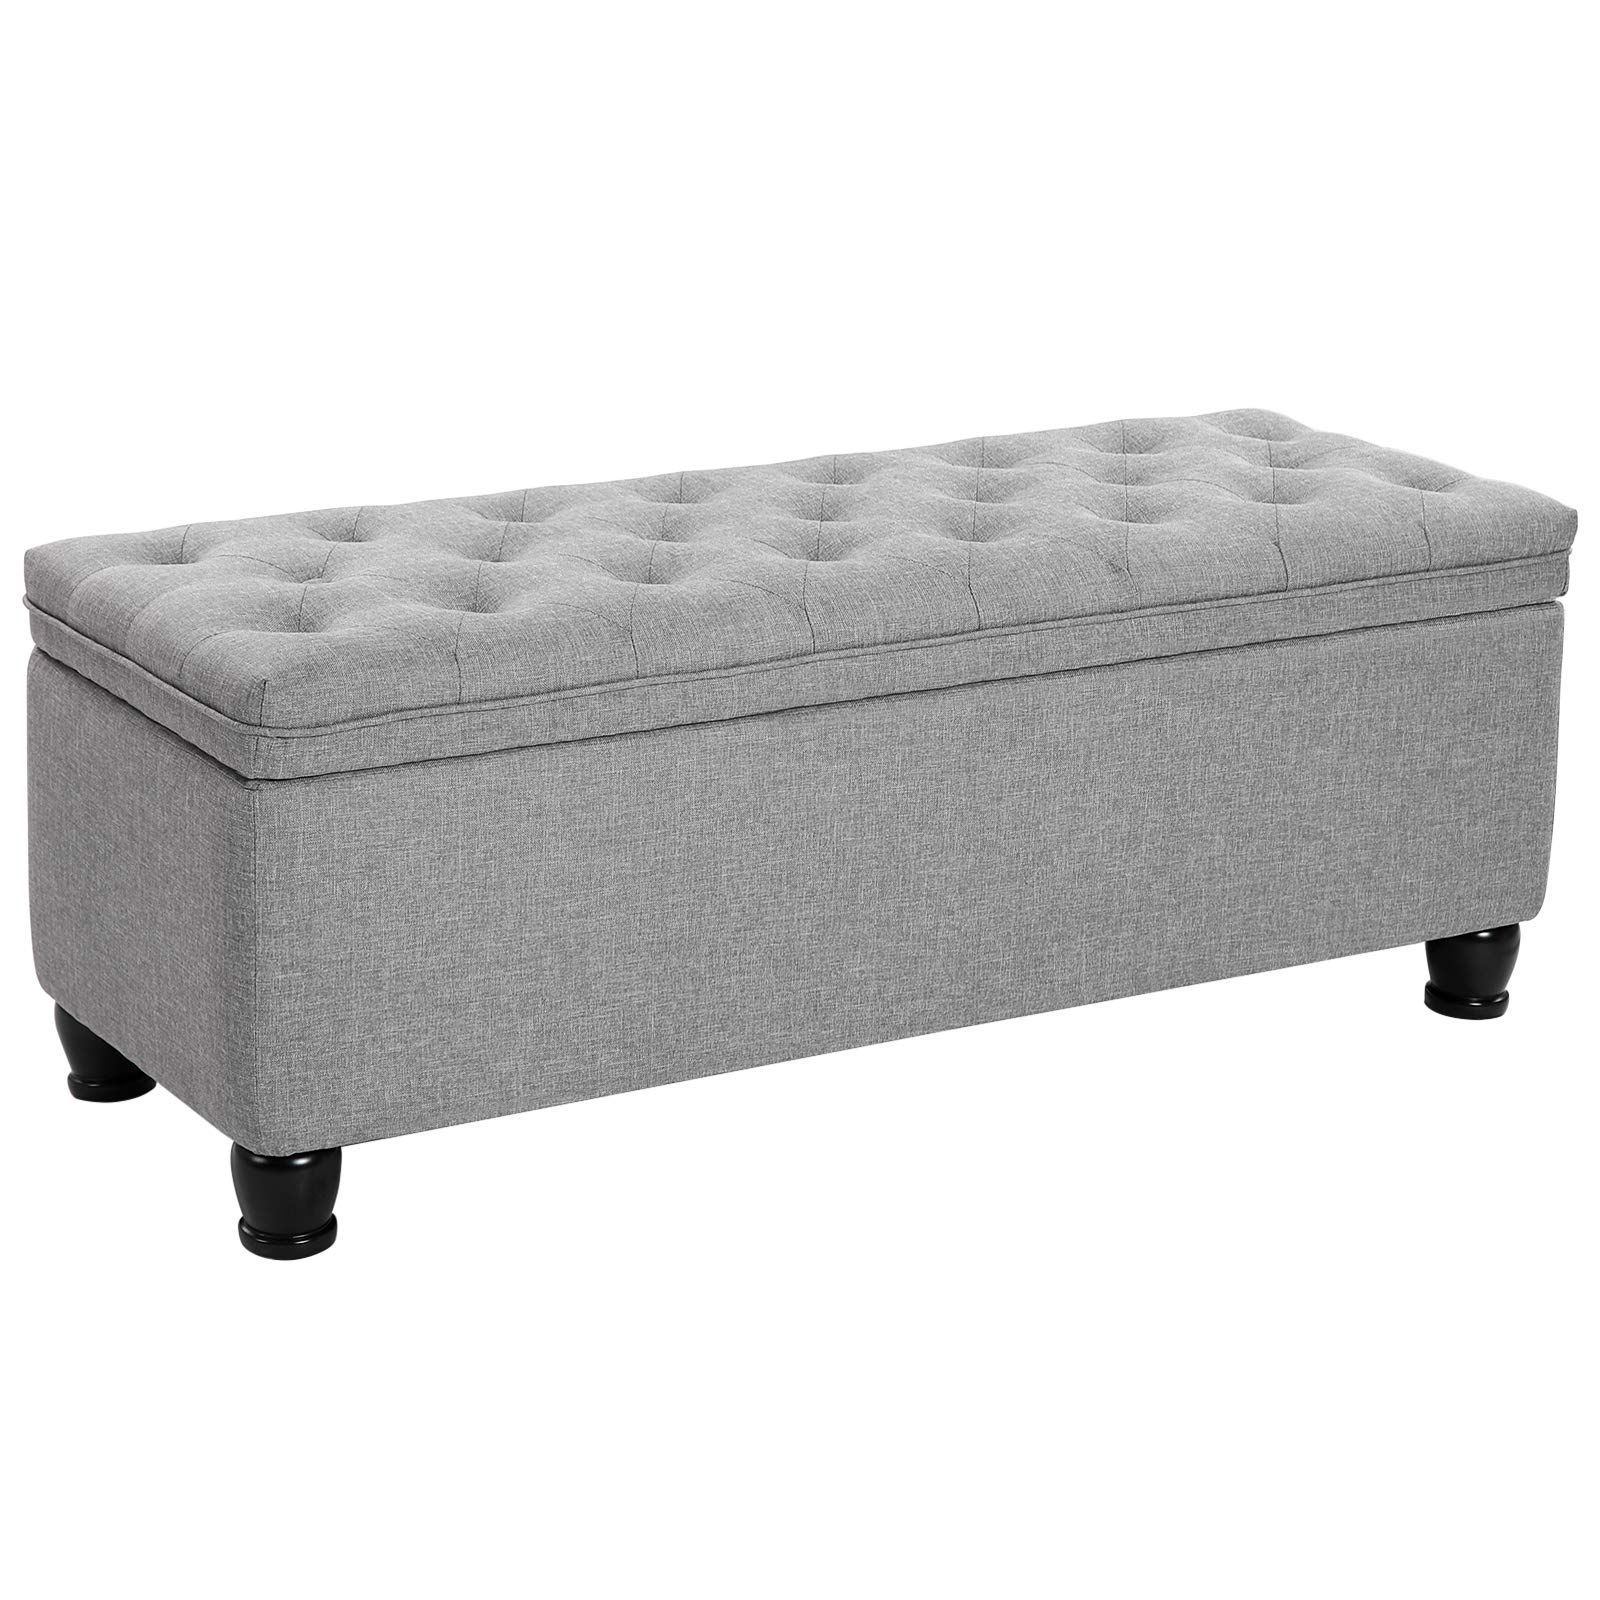 Gray Ottomans Intended For Fashionable Amazon: Songmics Storage Ottoman Bench, Linen Fabric Footstool With  Foam Padded Seat, Solid Wood Legs,  (View 7 of 10)